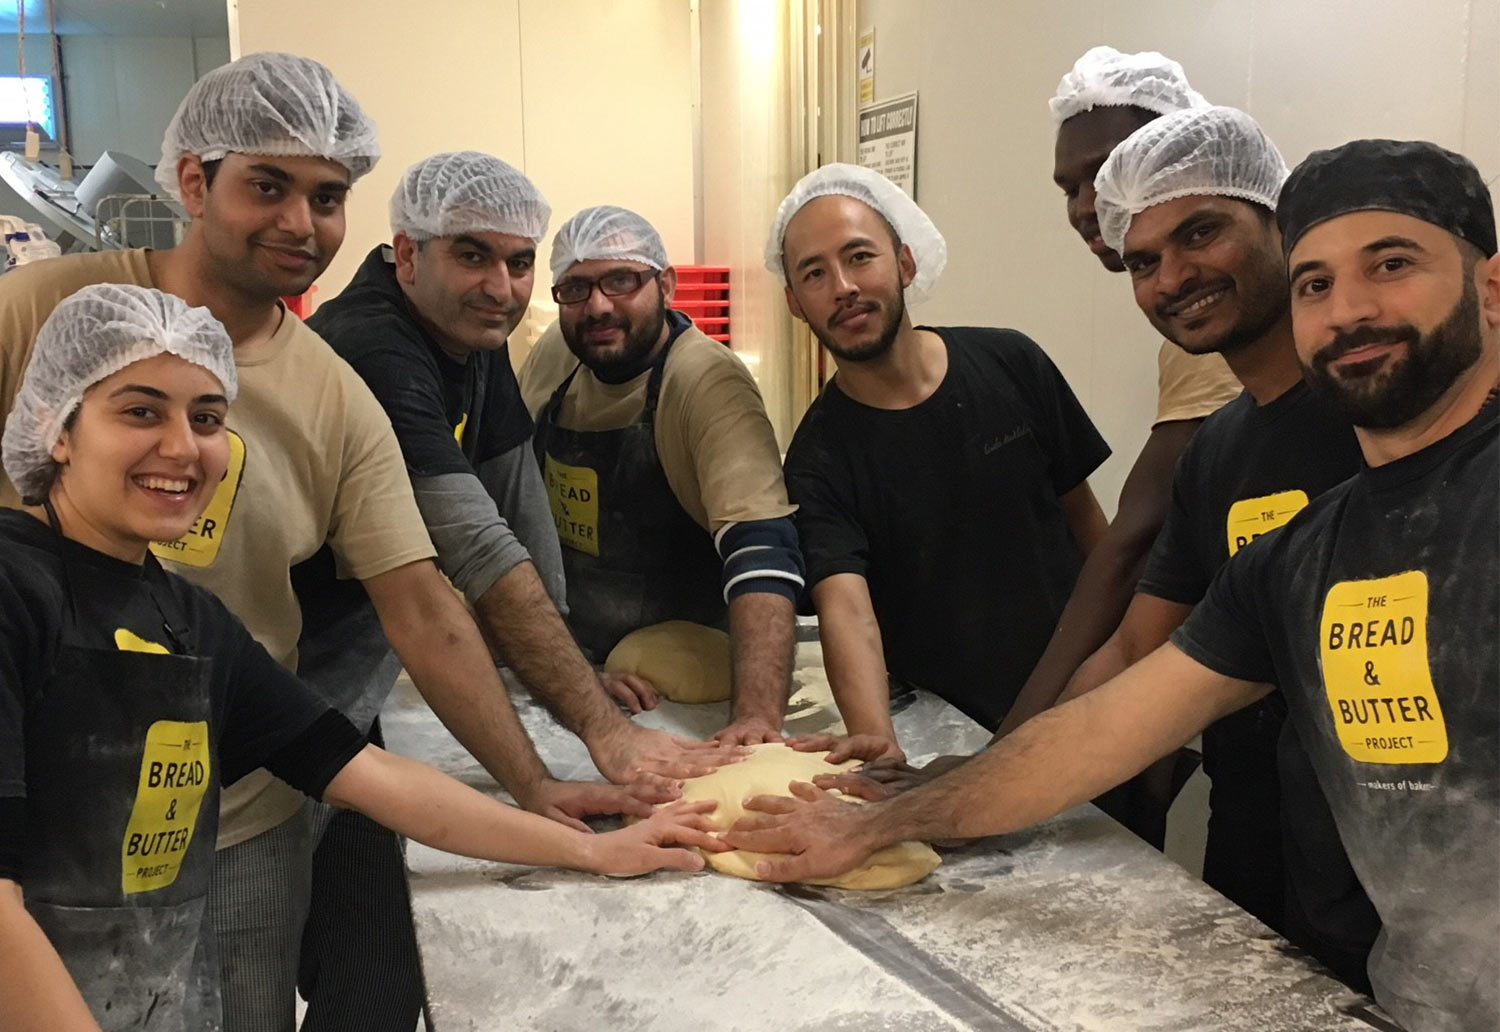 Image of the Bread and Butter Project Team making bread